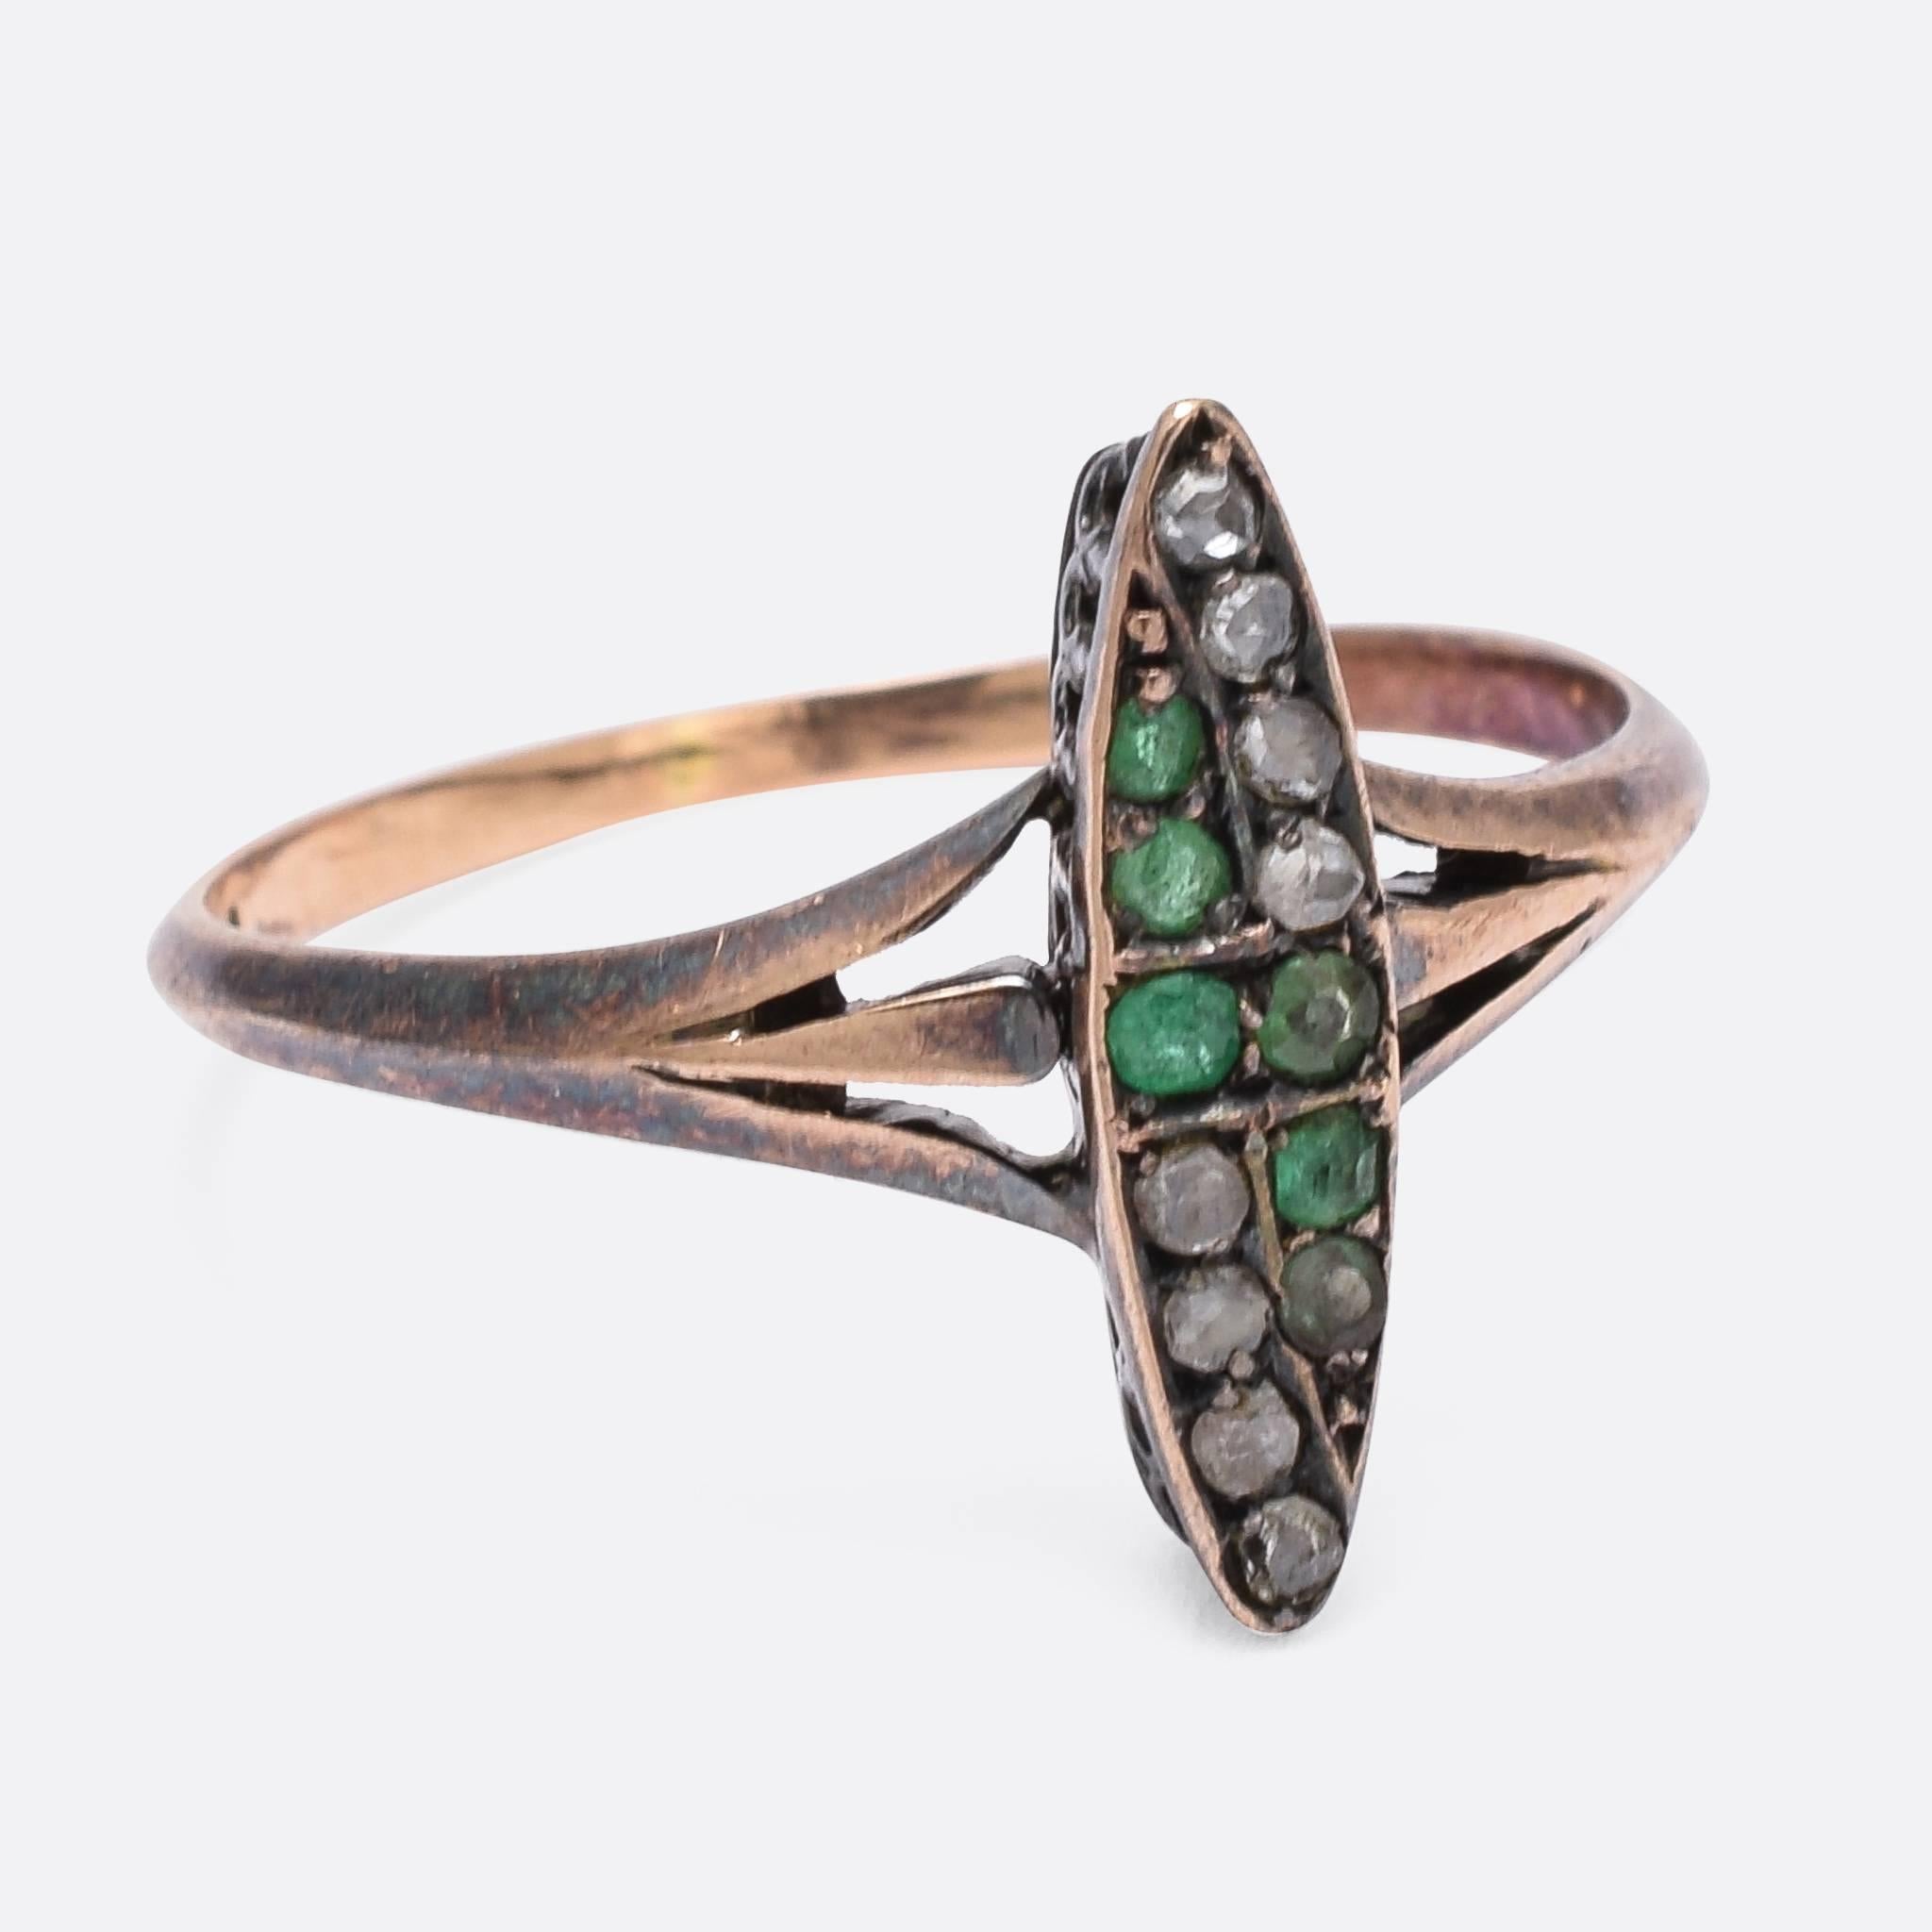 This dainty Art Nouveau ring was made in the late 19th Century, c.1890. The exaggerated marquise shaped head is set with rose cut diamonds and emeralds. It's modelled in 14ct rose gold, with pretty trifurcated shoulders and a gorgeous antique